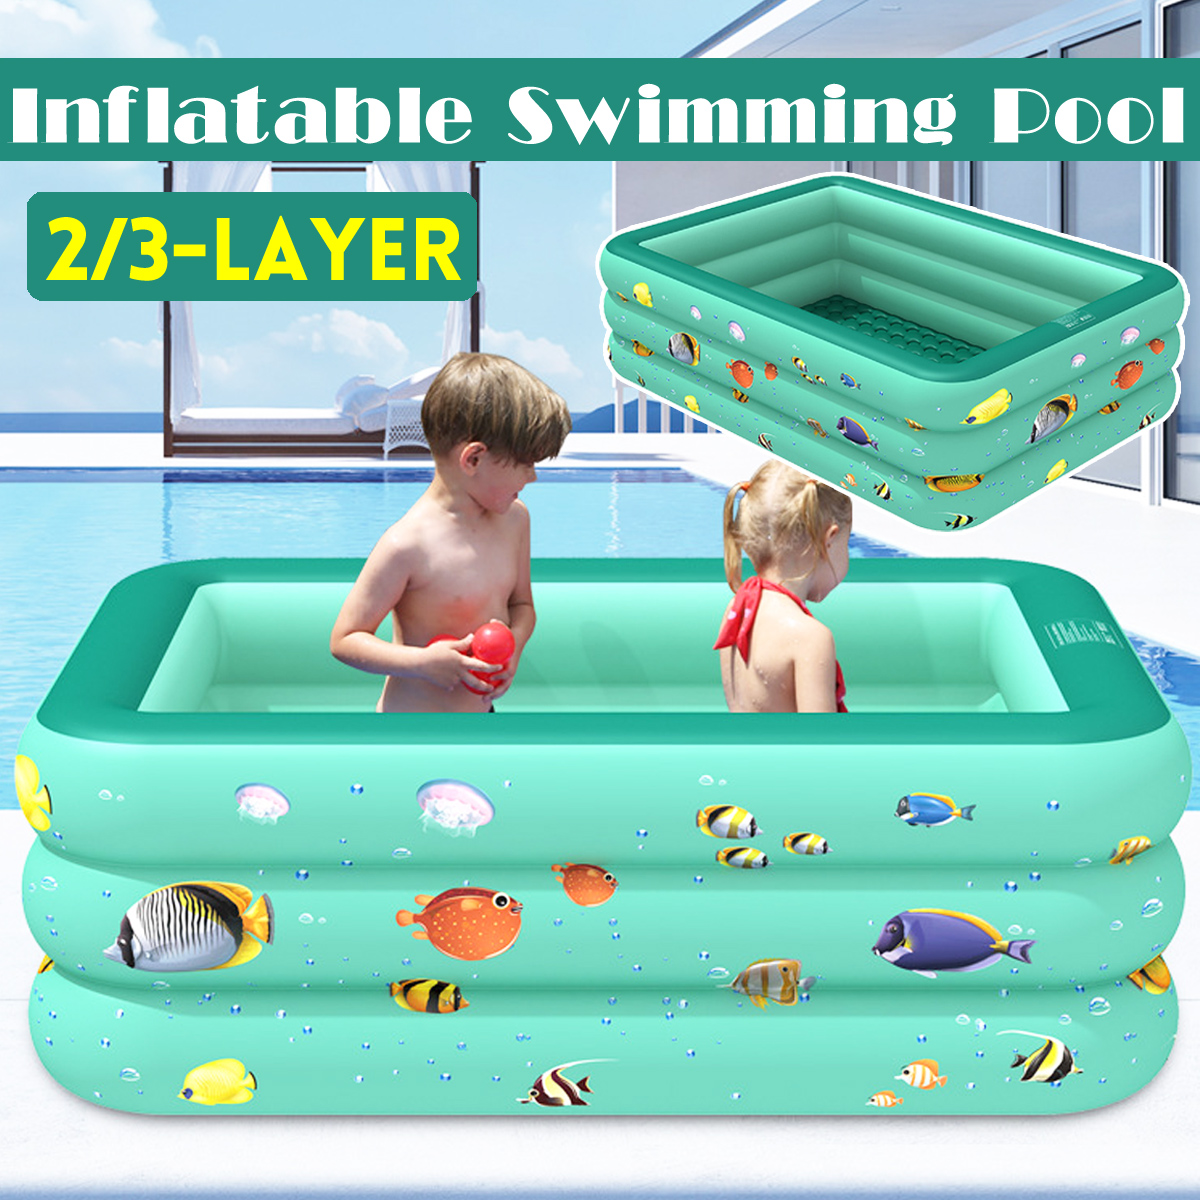 Inflatable-Swimming-Pool-PVC-Family-Bathing-Tub-Paddling-Pool-Summer-Outdoor-Garden-1823305-1